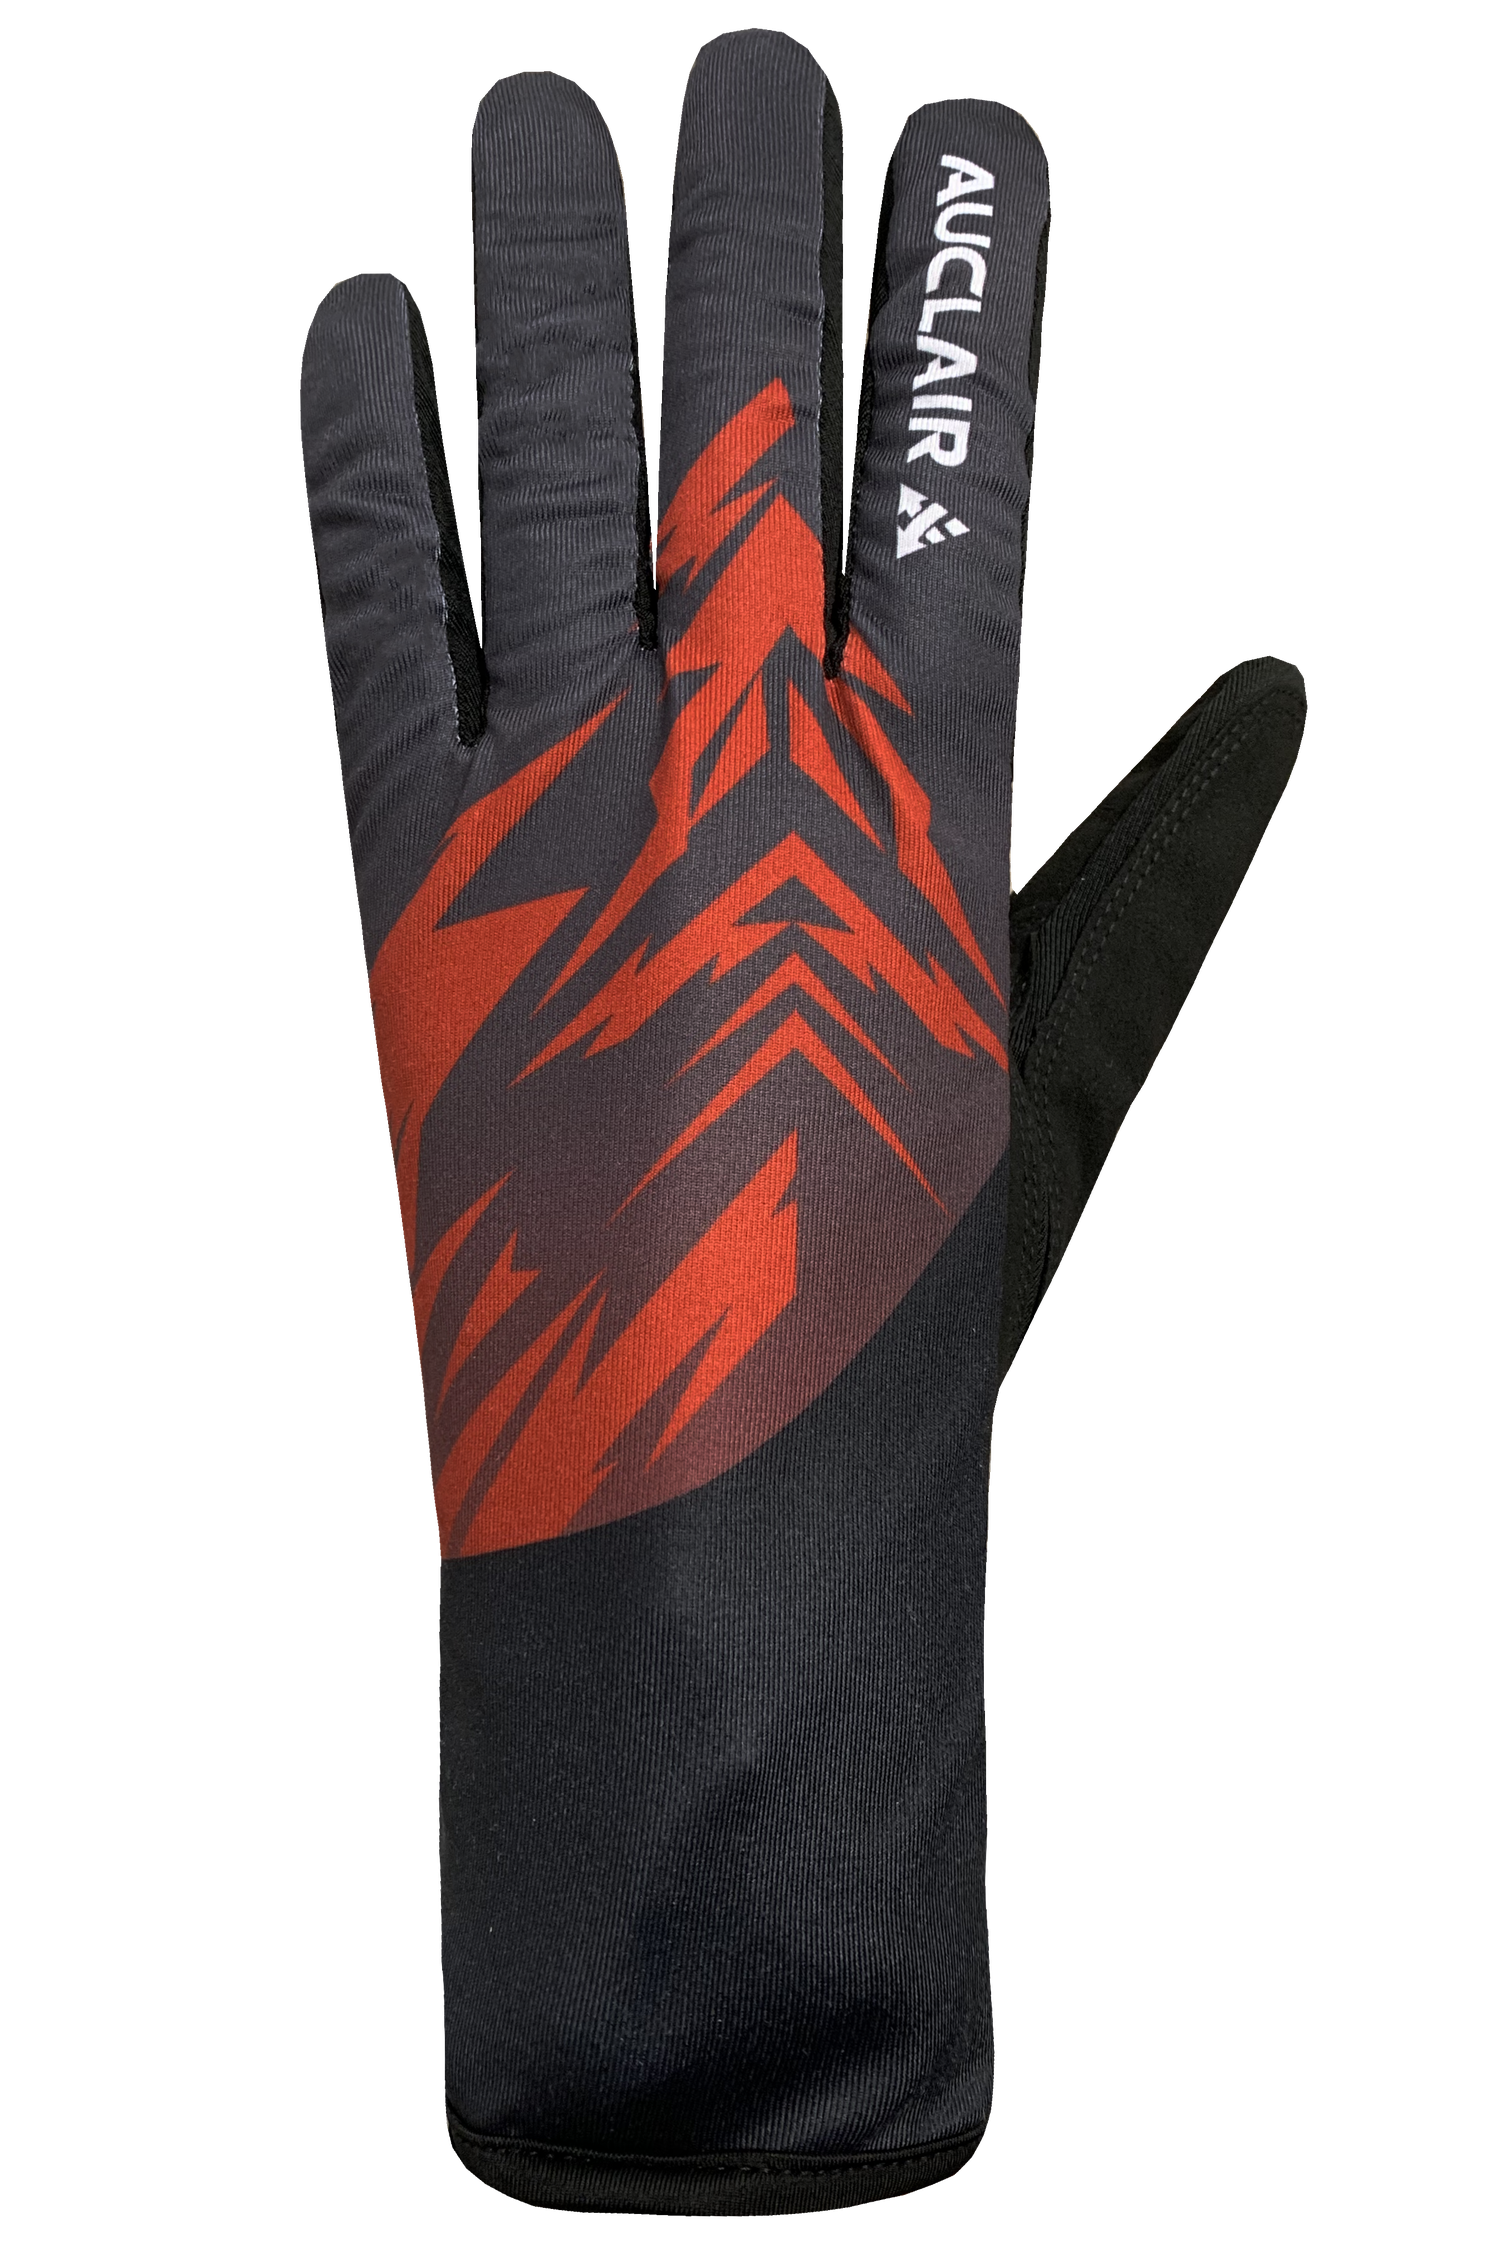 Nordiq Canada Race Gloves - Adult, Black/Red